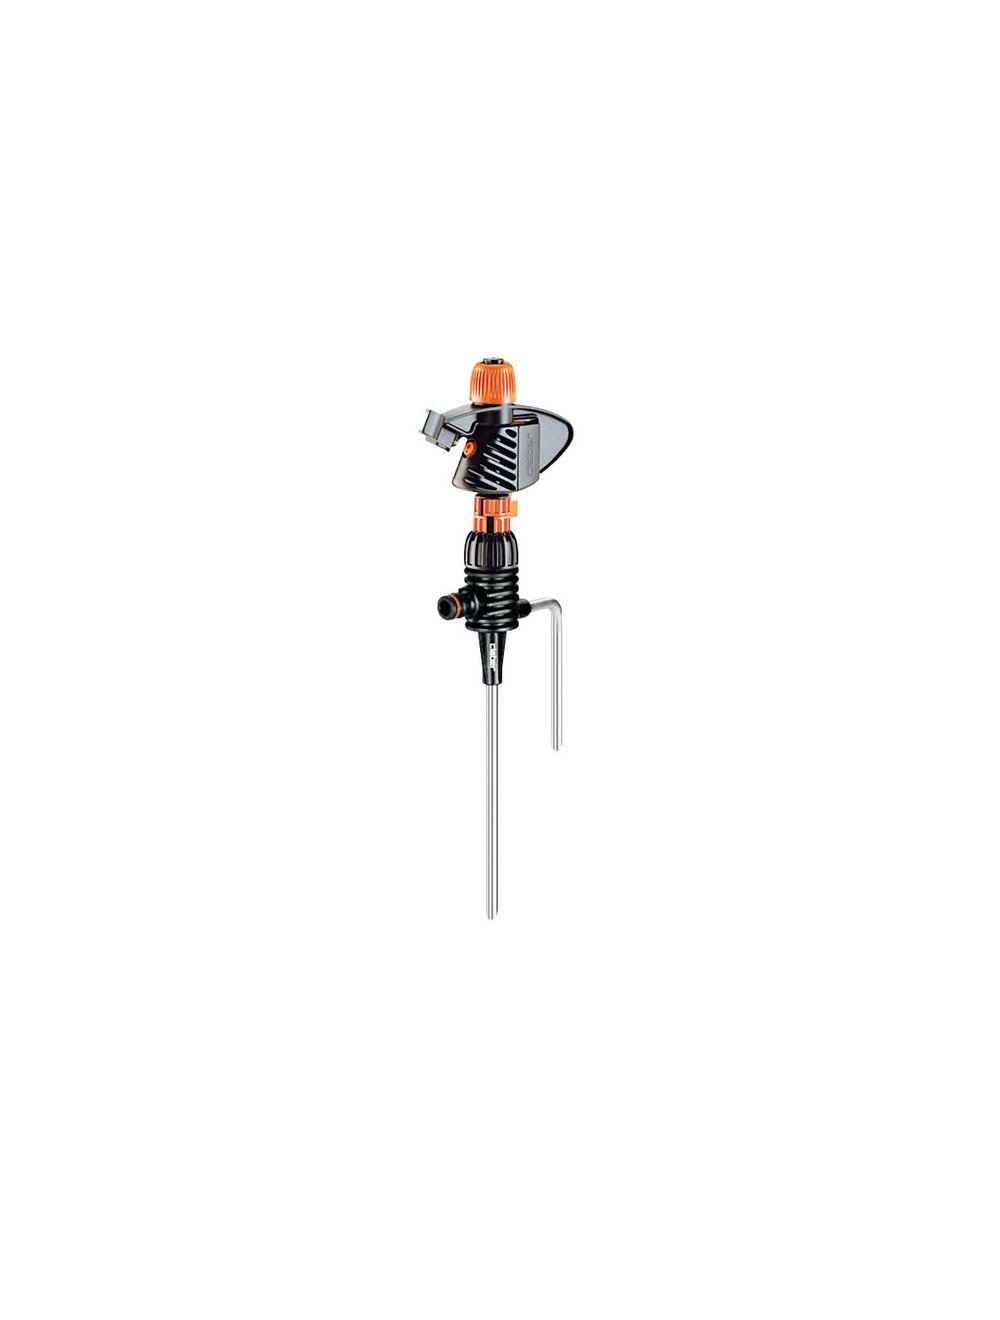 Impact Spike Claber 8707